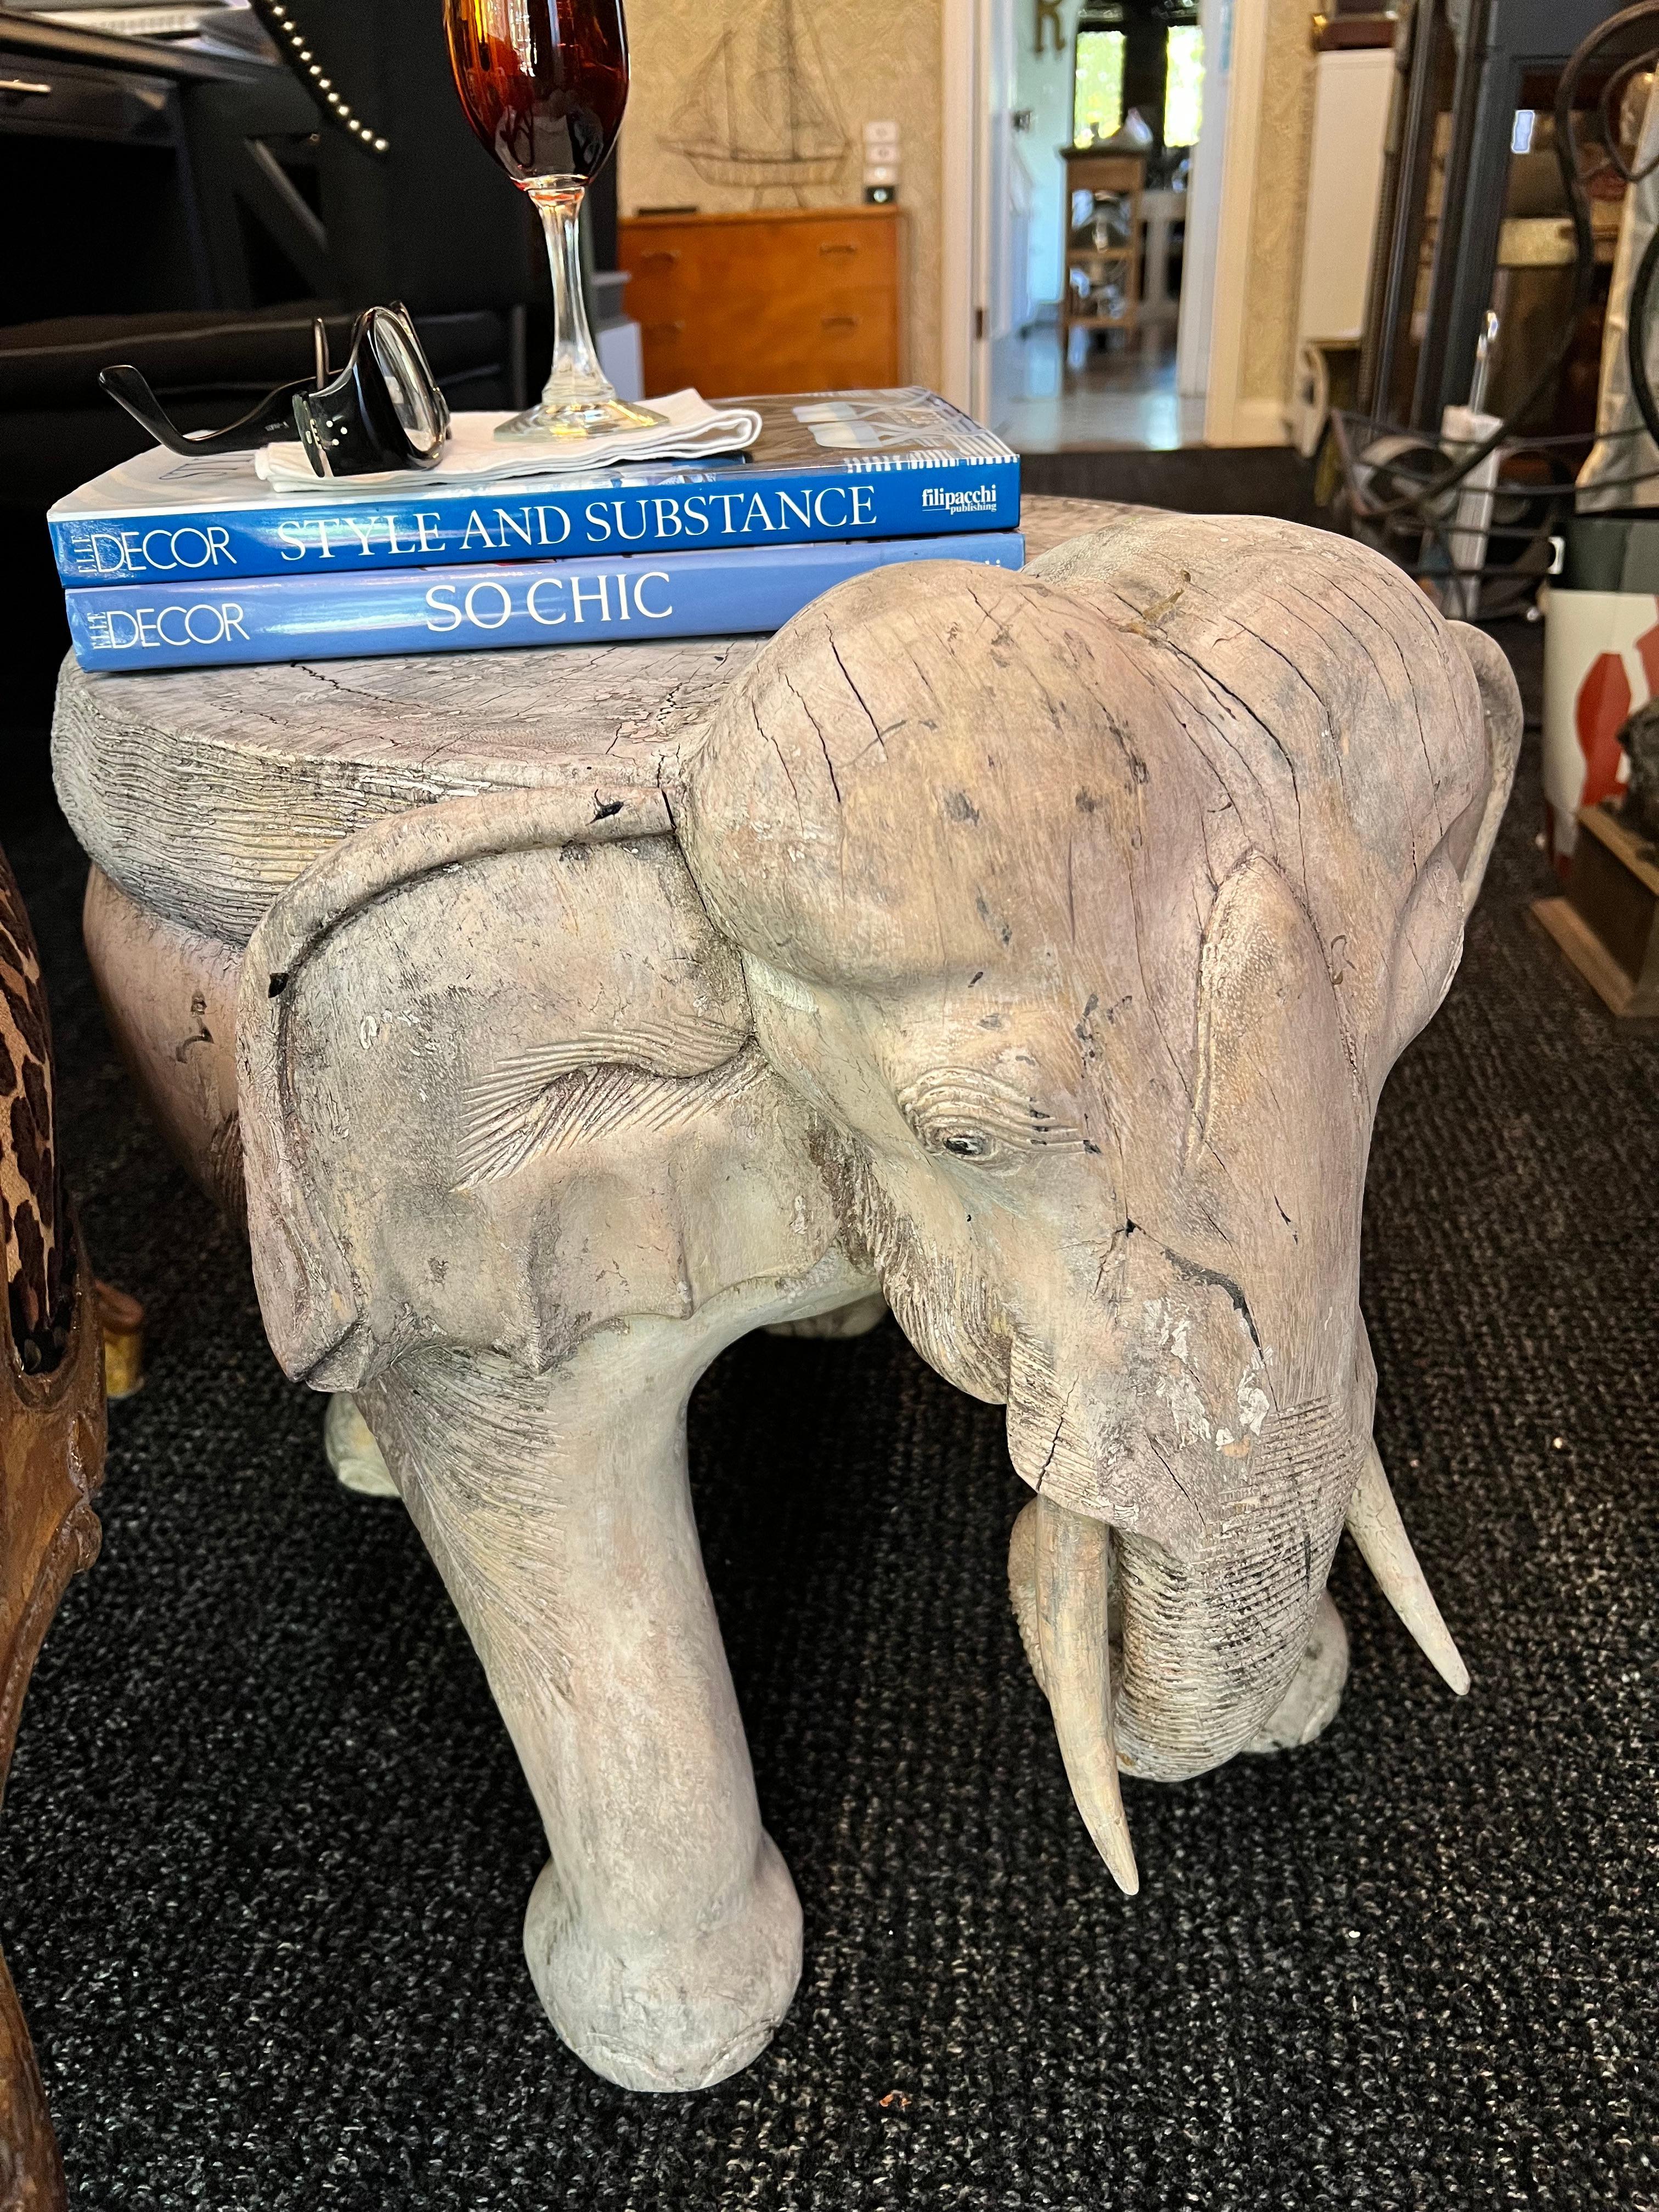 A solid piece of wood carved in the shape of an elephant.  The piece was previously painted and now has a wonderfully patinated surface.  The table would compliment many spaces, from a Childs room, to the den or even outside in a covered patio or